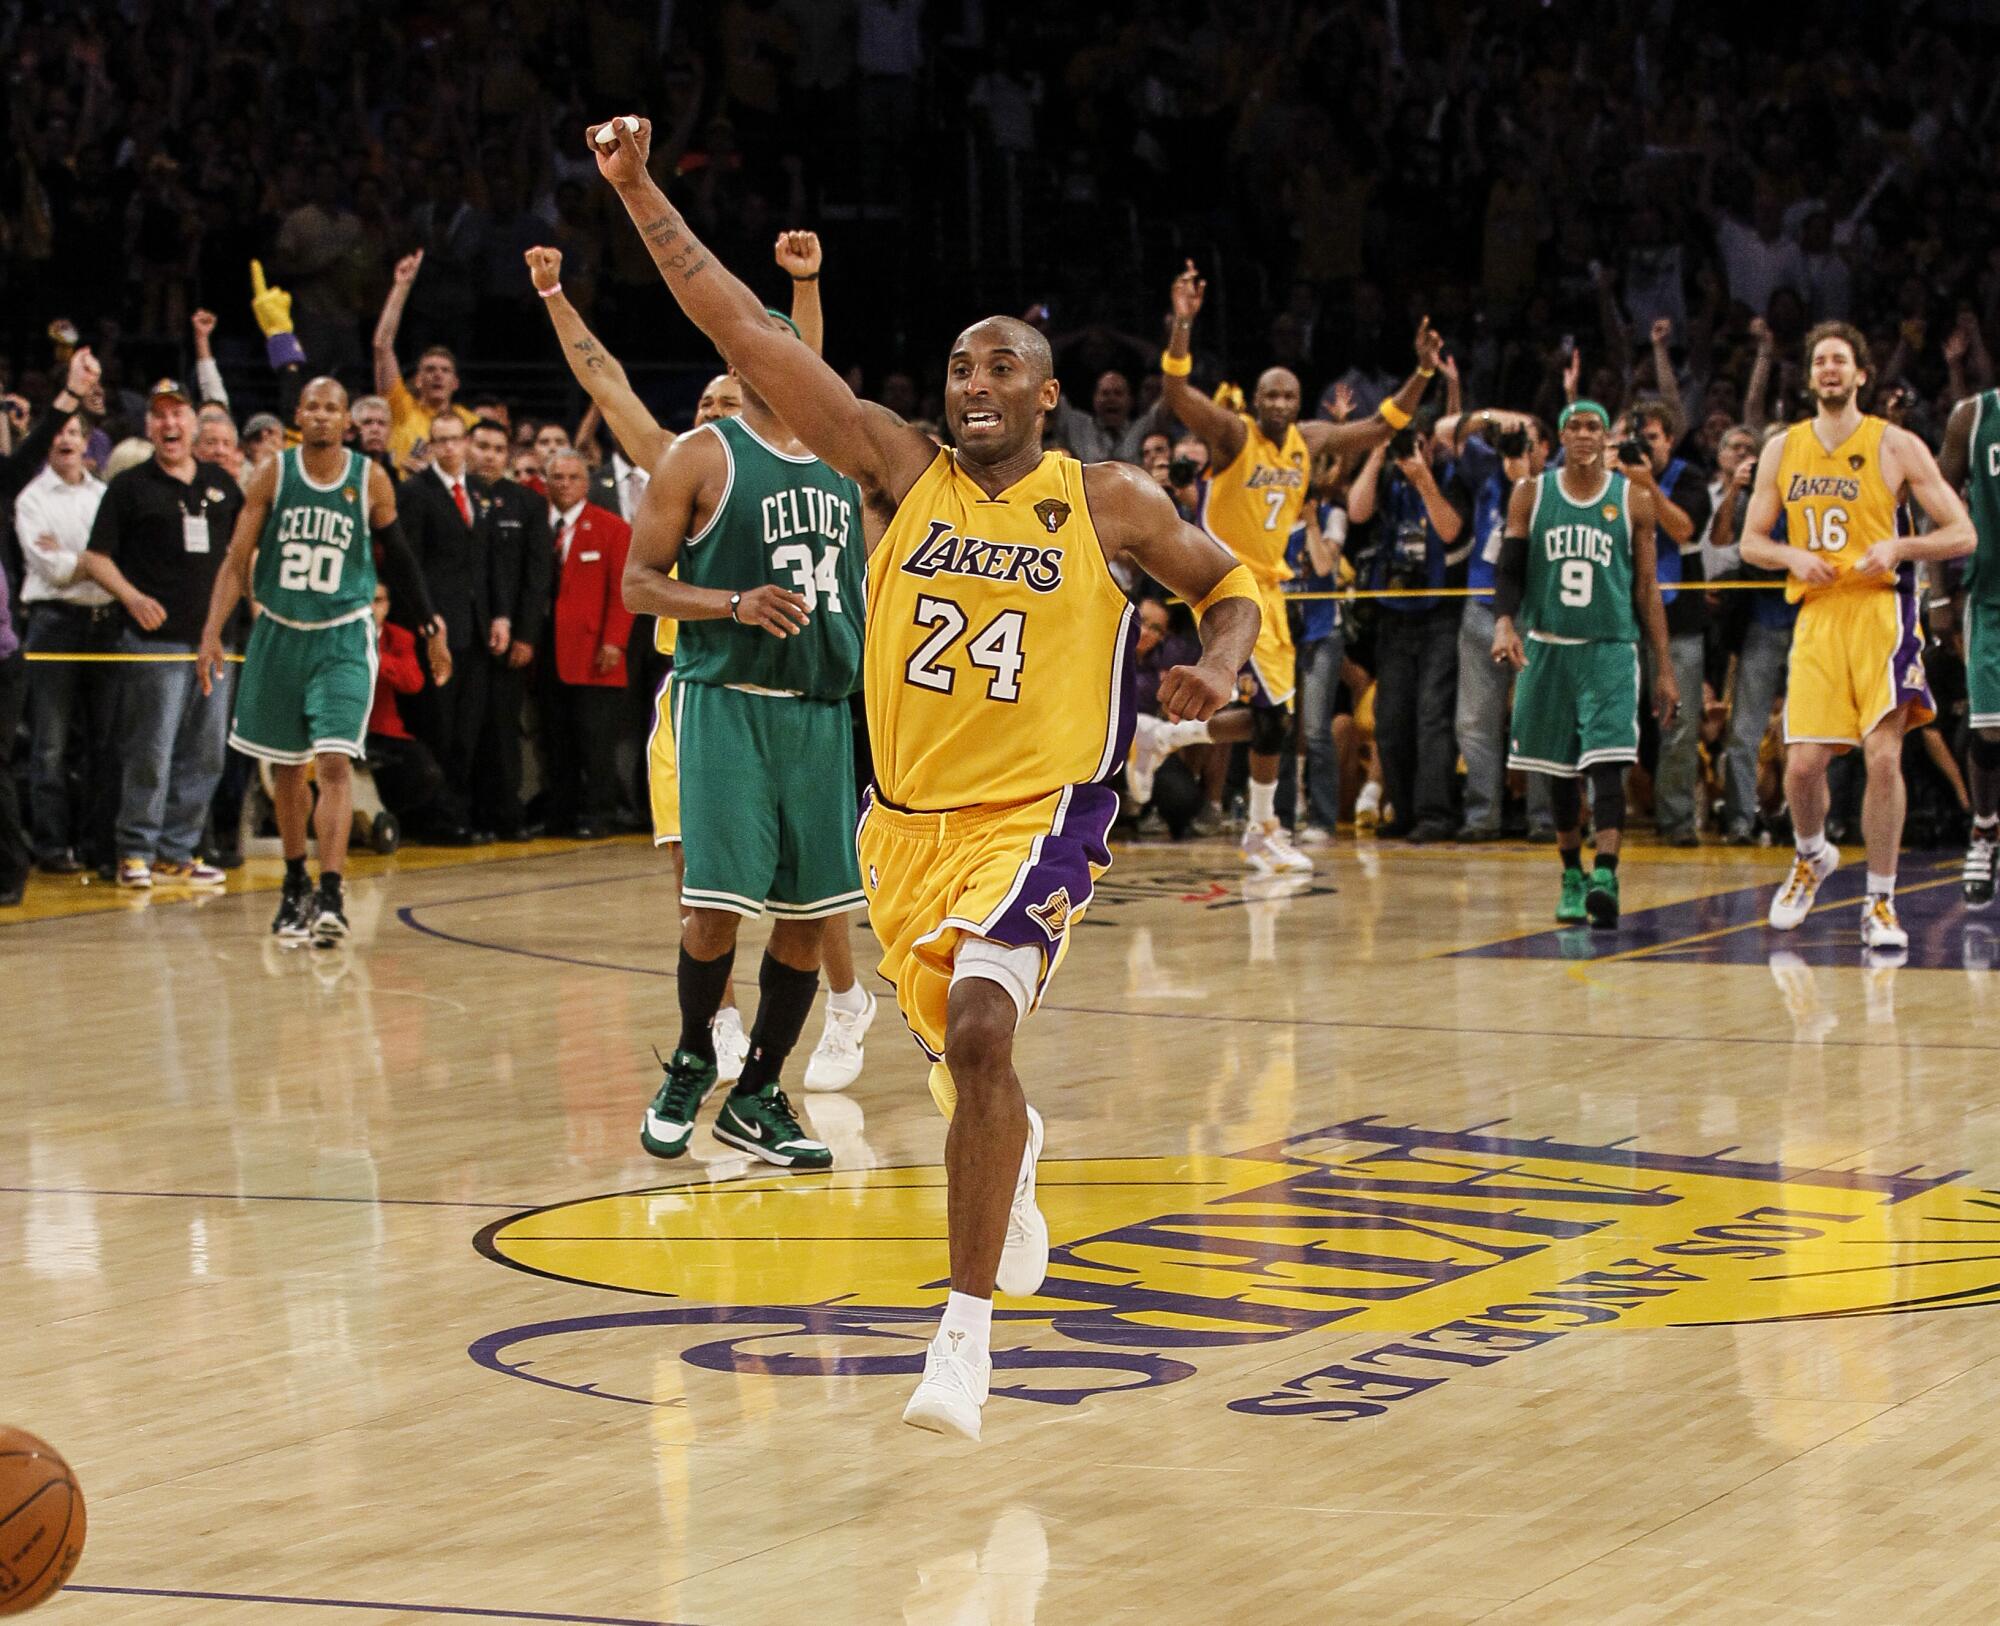 Kobe Bryant begins the celebration as the Lakers beat the Celtics for the NBA Championship at Staples Center.